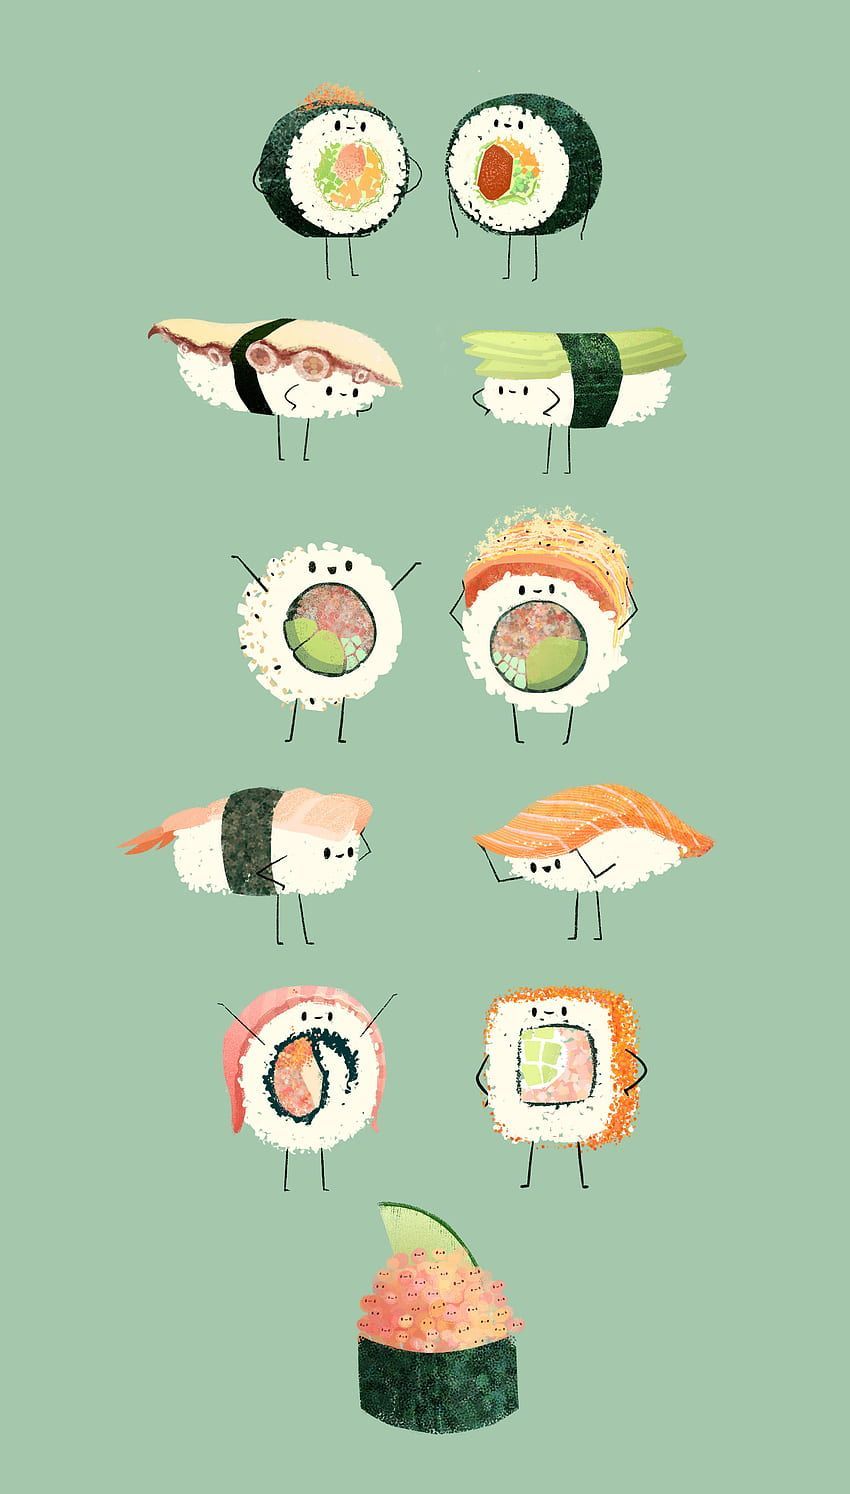 Sushi wallpaper for your phone! - Sushi